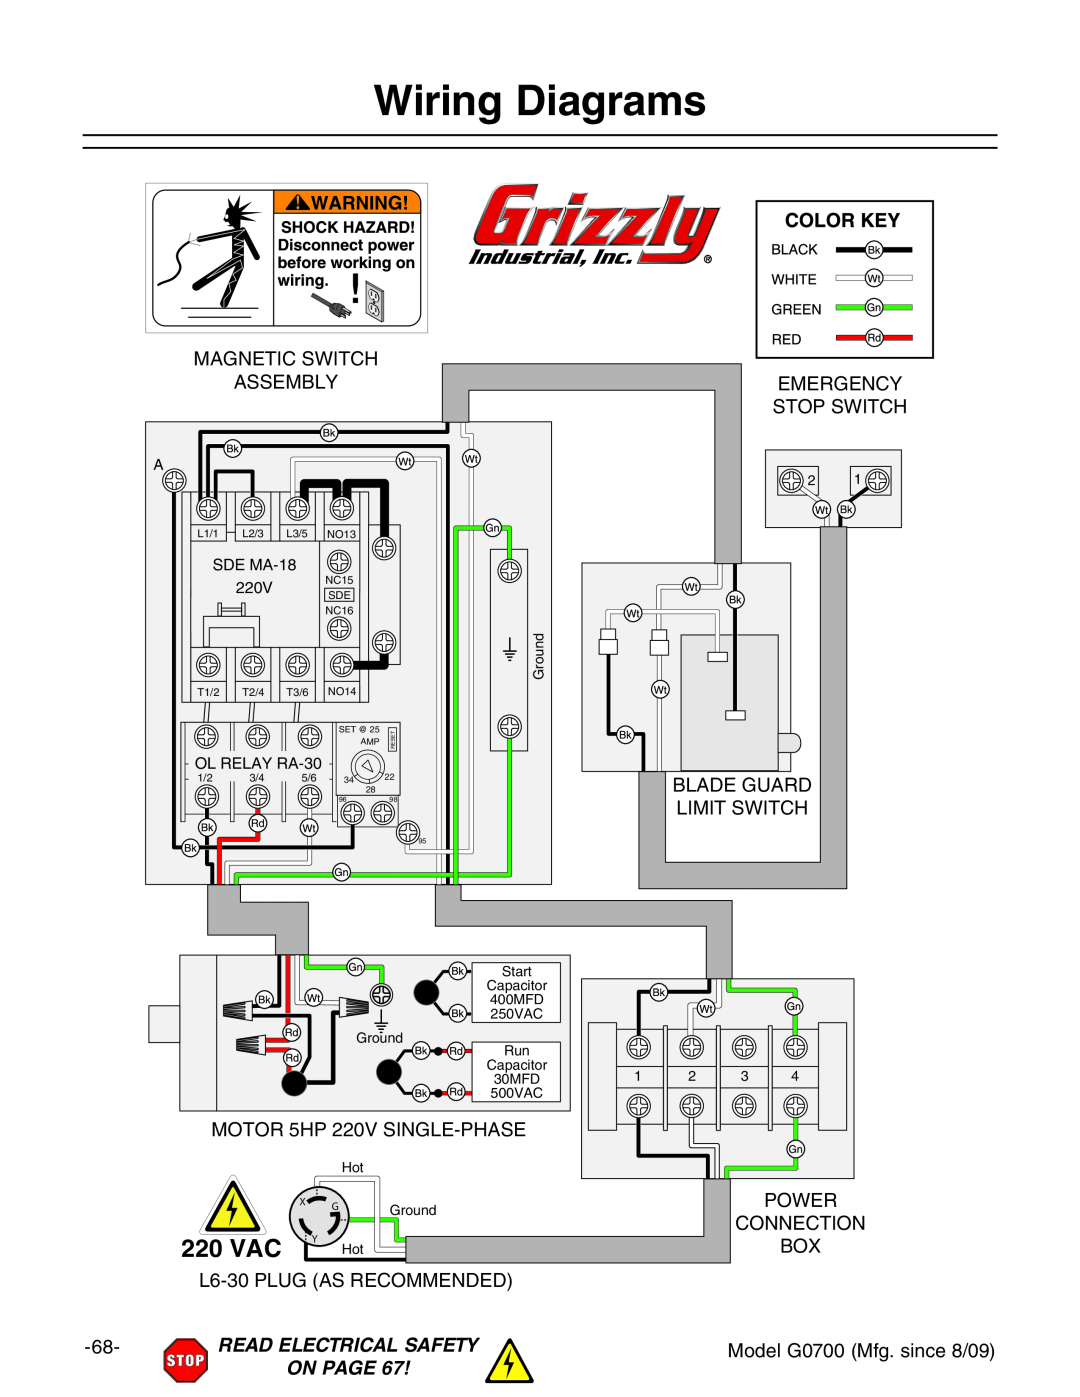 Grizzly G0700 Wiring Diagrams, 220 VAC, Stop Switch, Power, Read Electrical Safety, On Page, Capacitor, 250VAC, 500VAC 